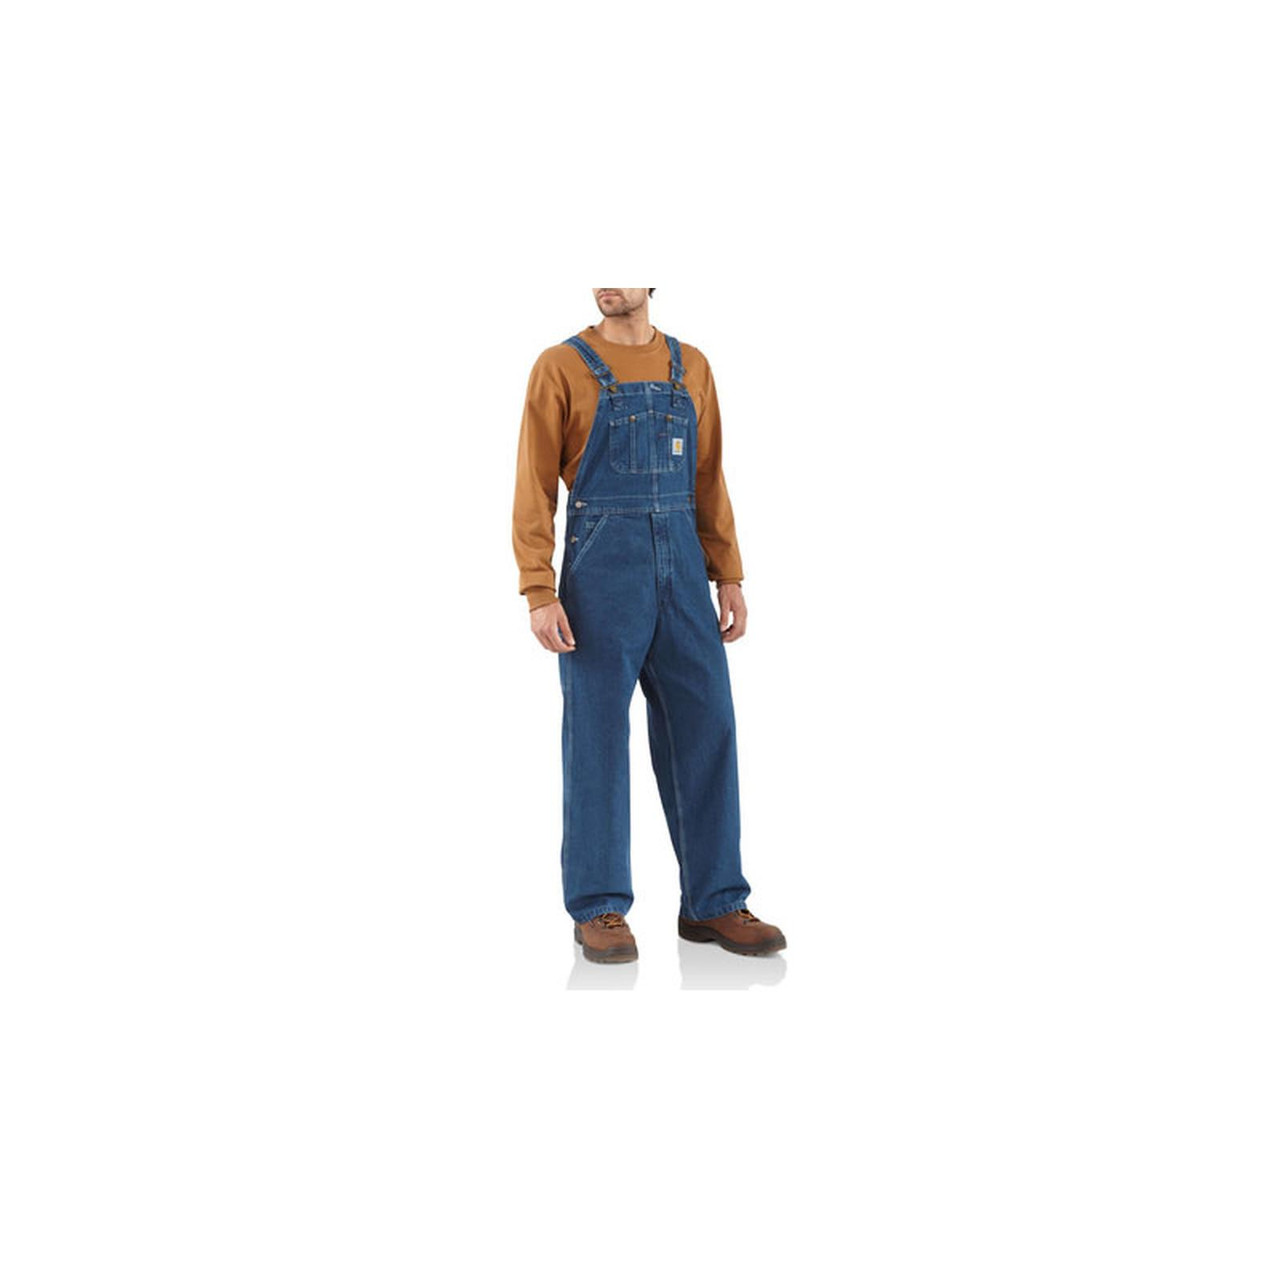 Carhartt Men's Washed Denim Bib Overall R07 - Fin Feather Fur Outfitters